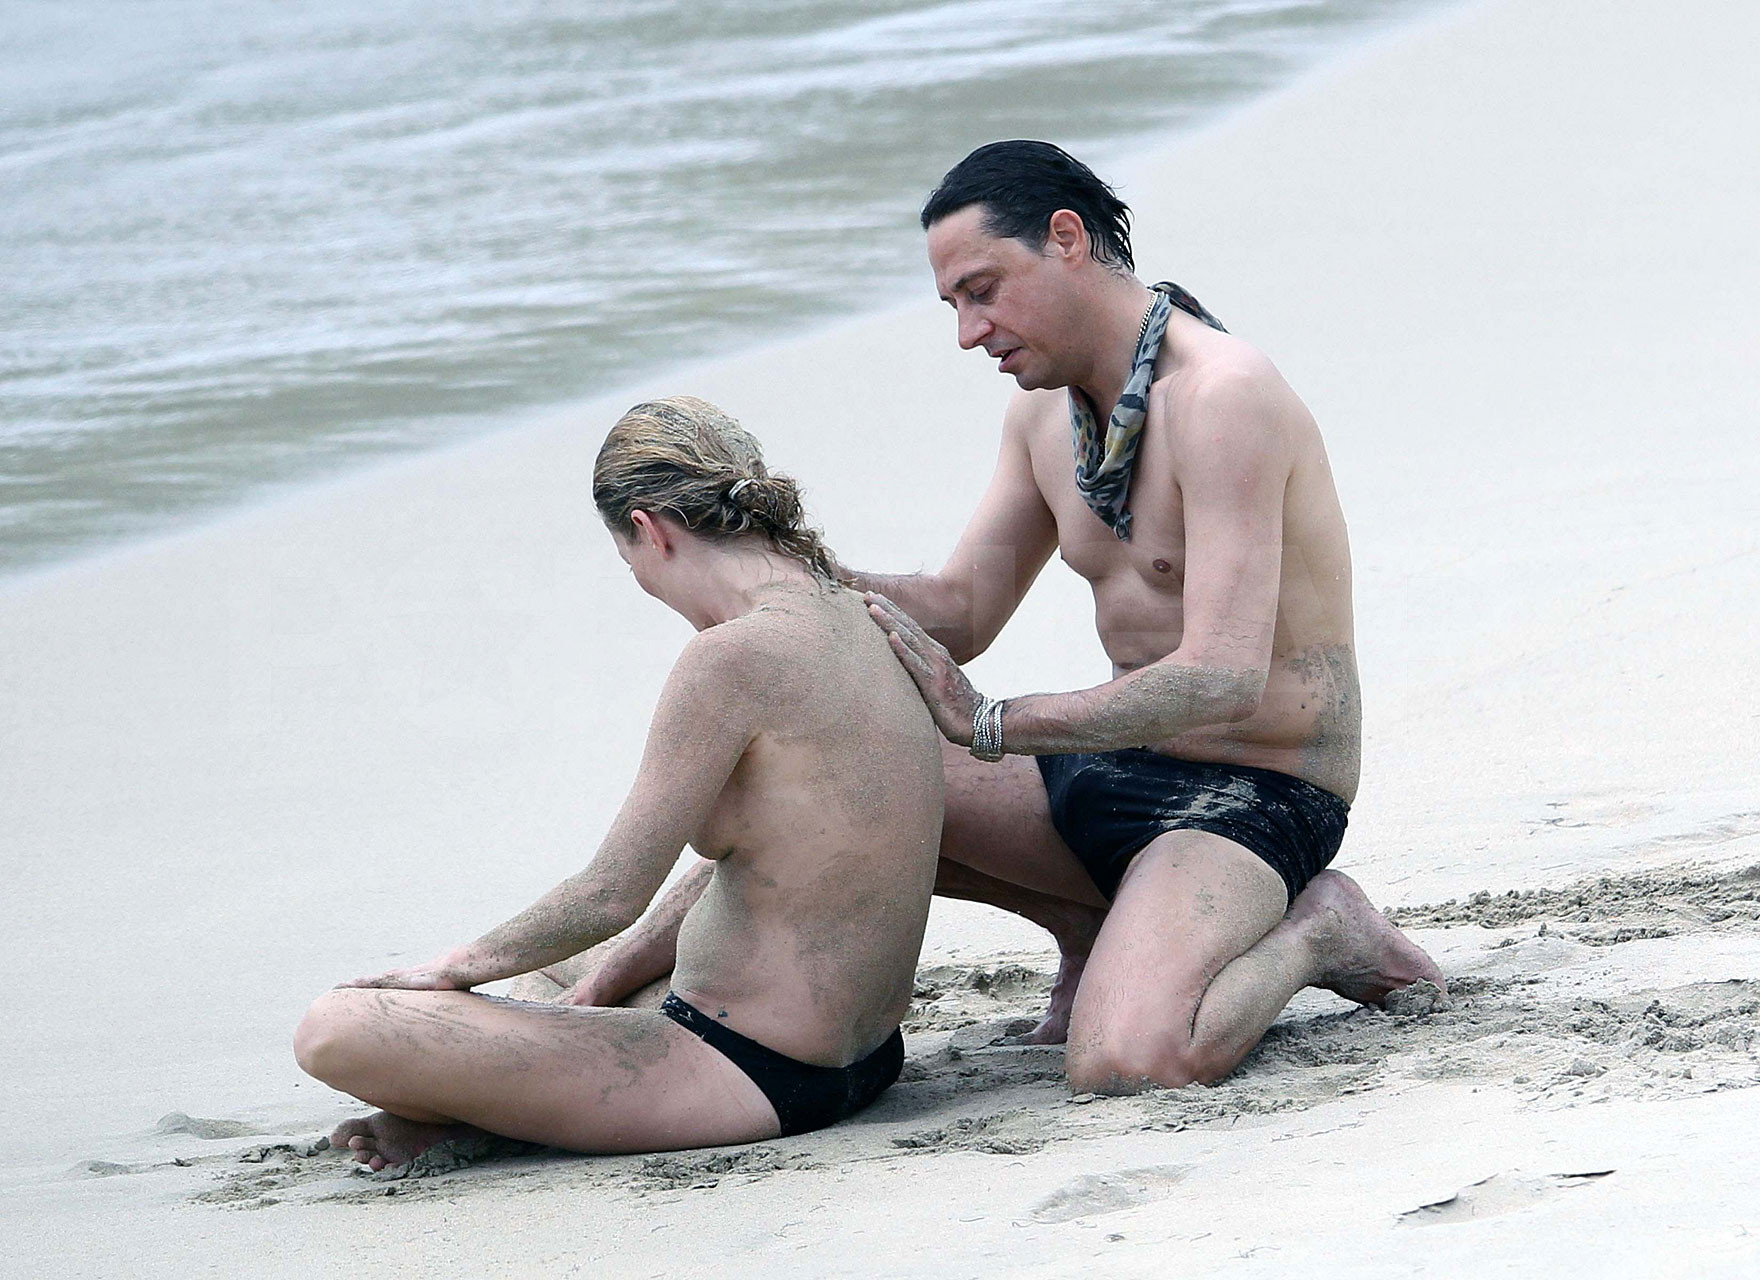 Kate Moss enjoying with her boyfriend on yacht in topless paparazzi photos #75347854